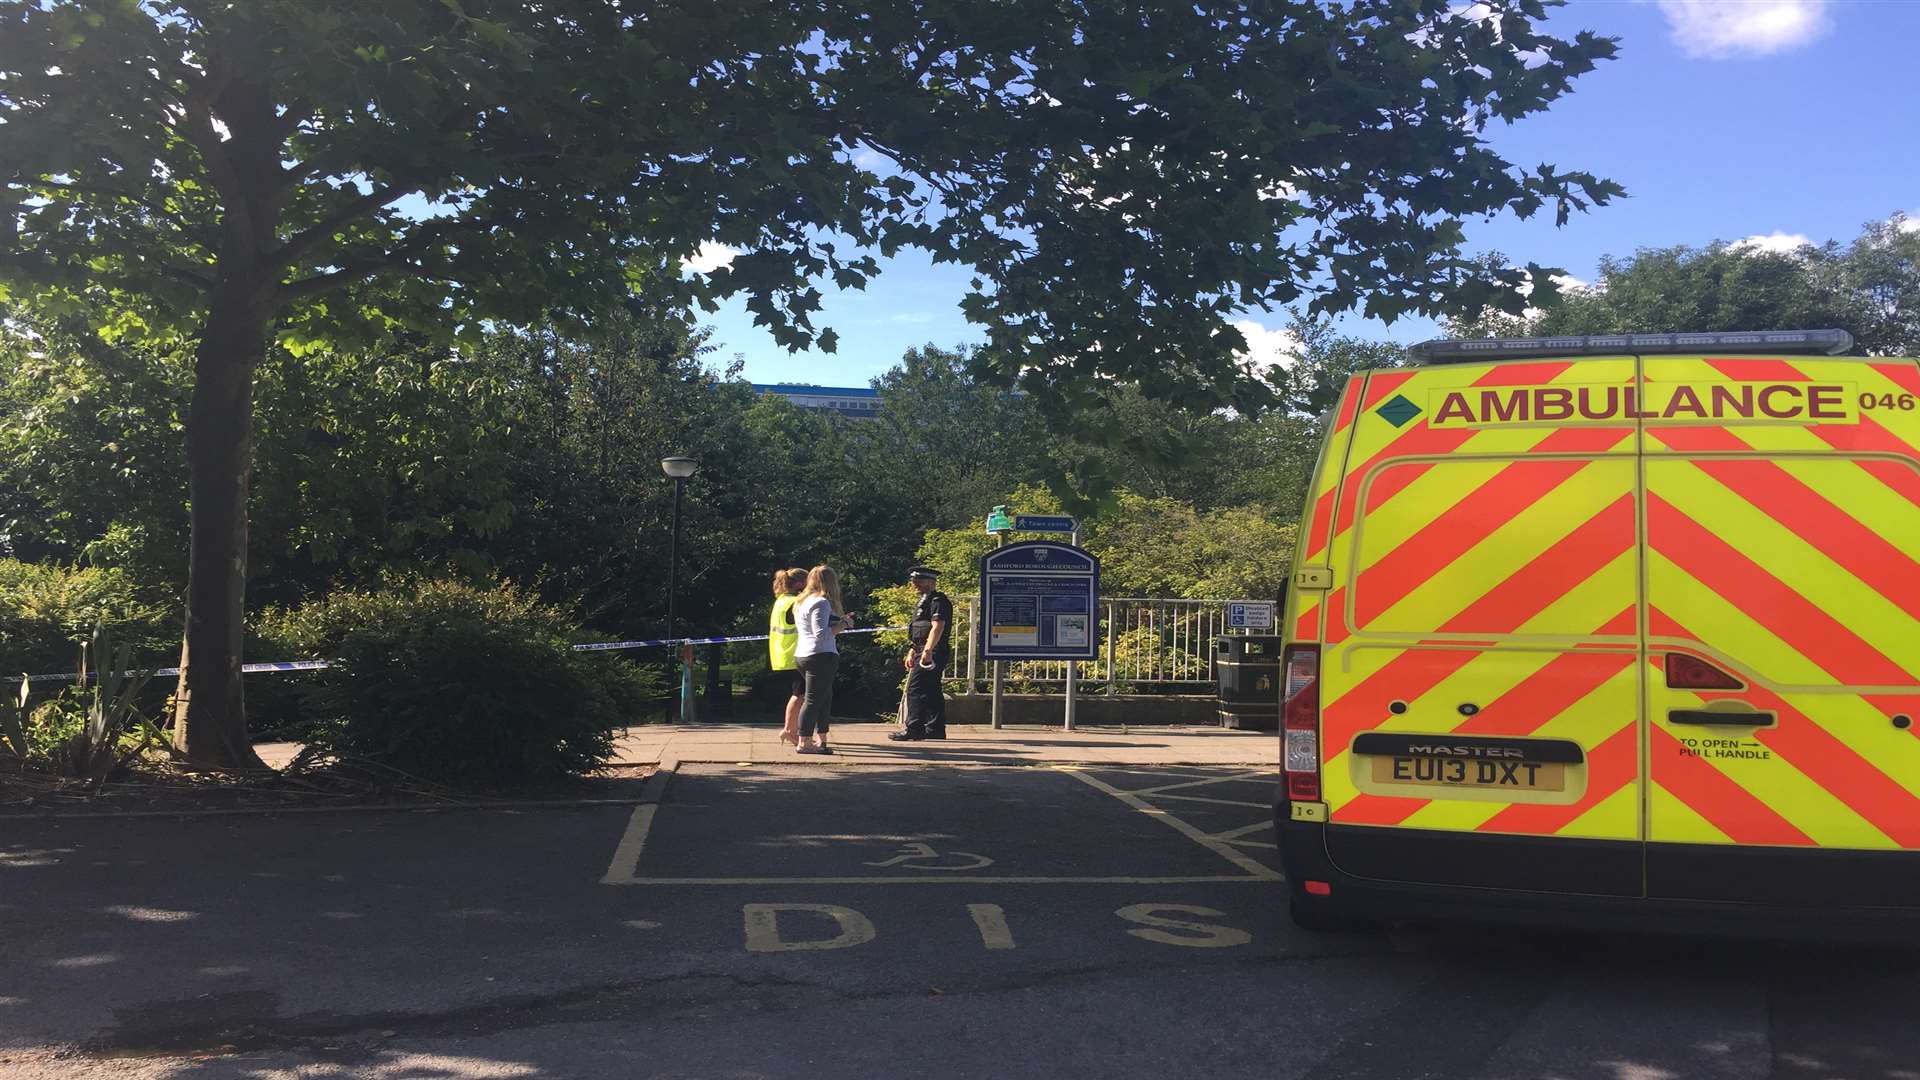 People have been evacuated from the leisure centre